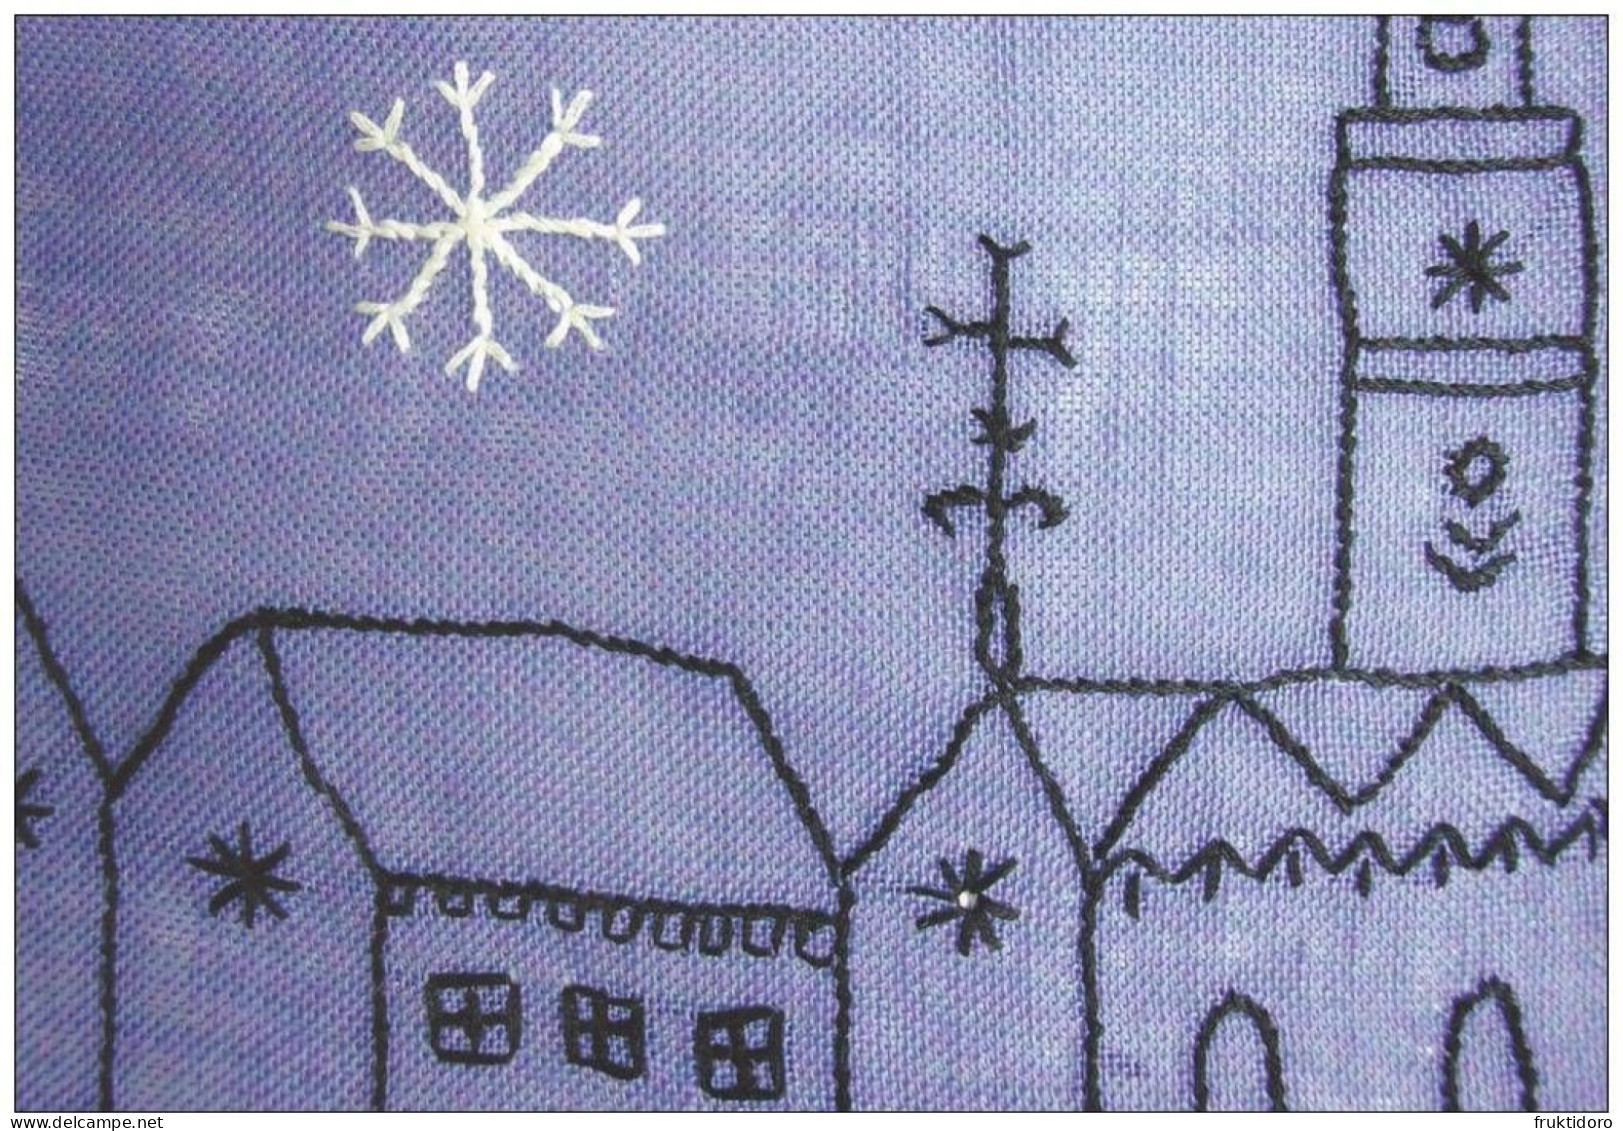 Norway Postal Stationery 2010 Christmas Embroidery First-Day Cancellation - Postal Stationery